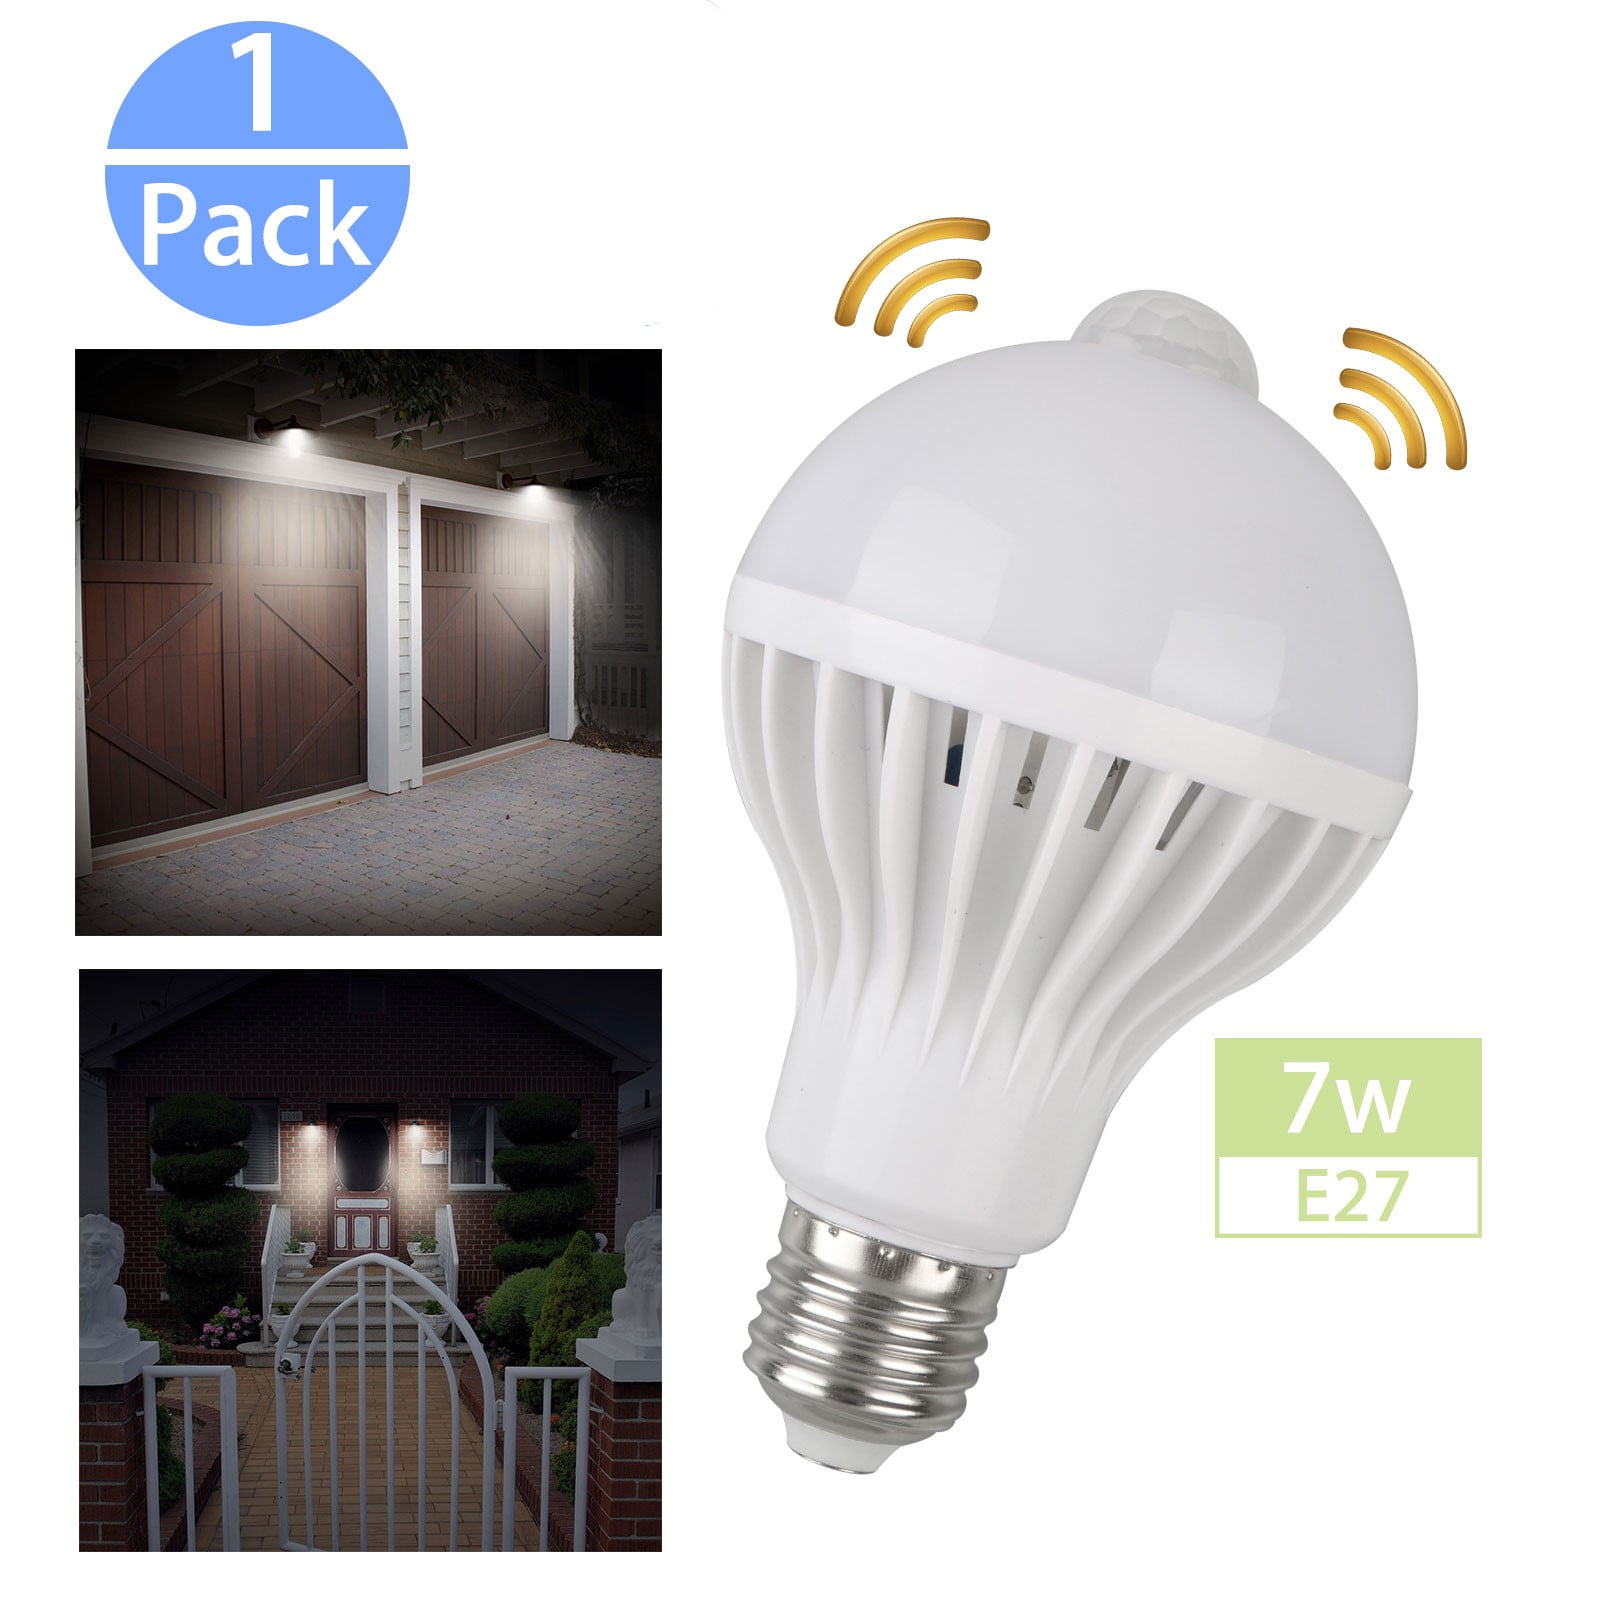 Whirlpool Levere Forstyrret Motion Sensor Light Bulbs Outdoor, Indoor Movement Activated LED Bulbs,7W  E26 Security Bulbs for Entrance Porch Stairs Garage Closet - Walmart.com